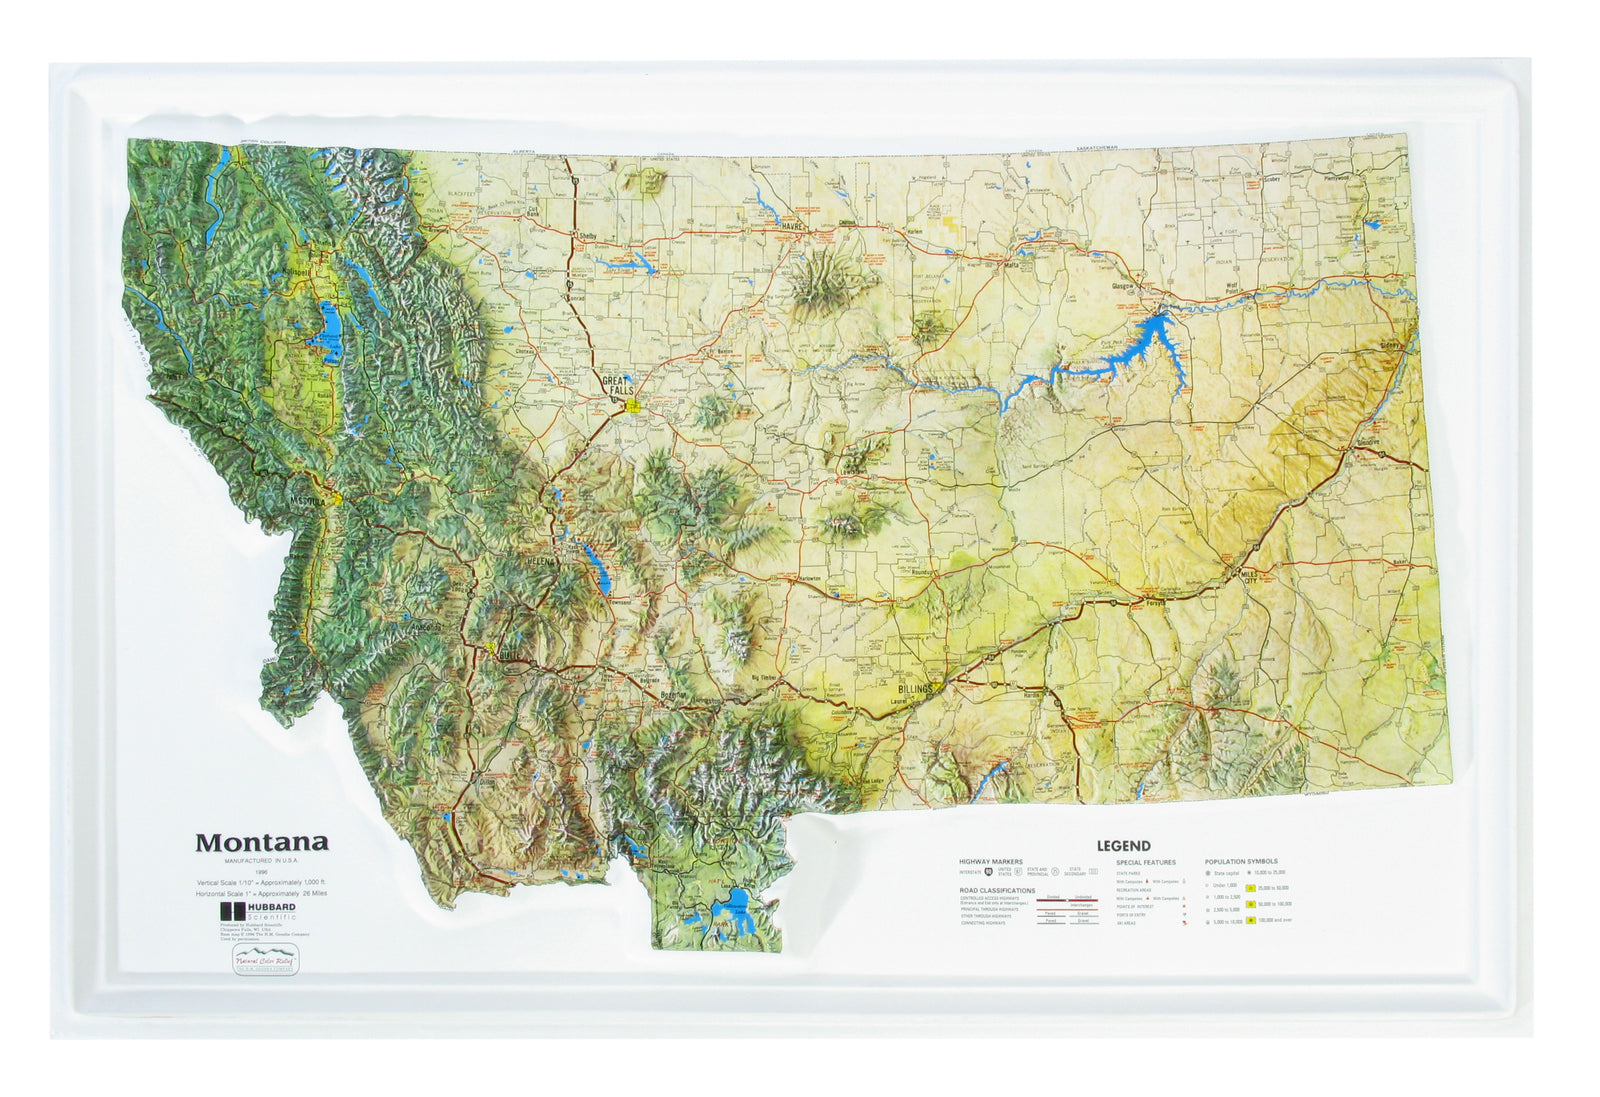 Raised Relief Maps Three Dimensional Maps 3d Maps Geomart 9884